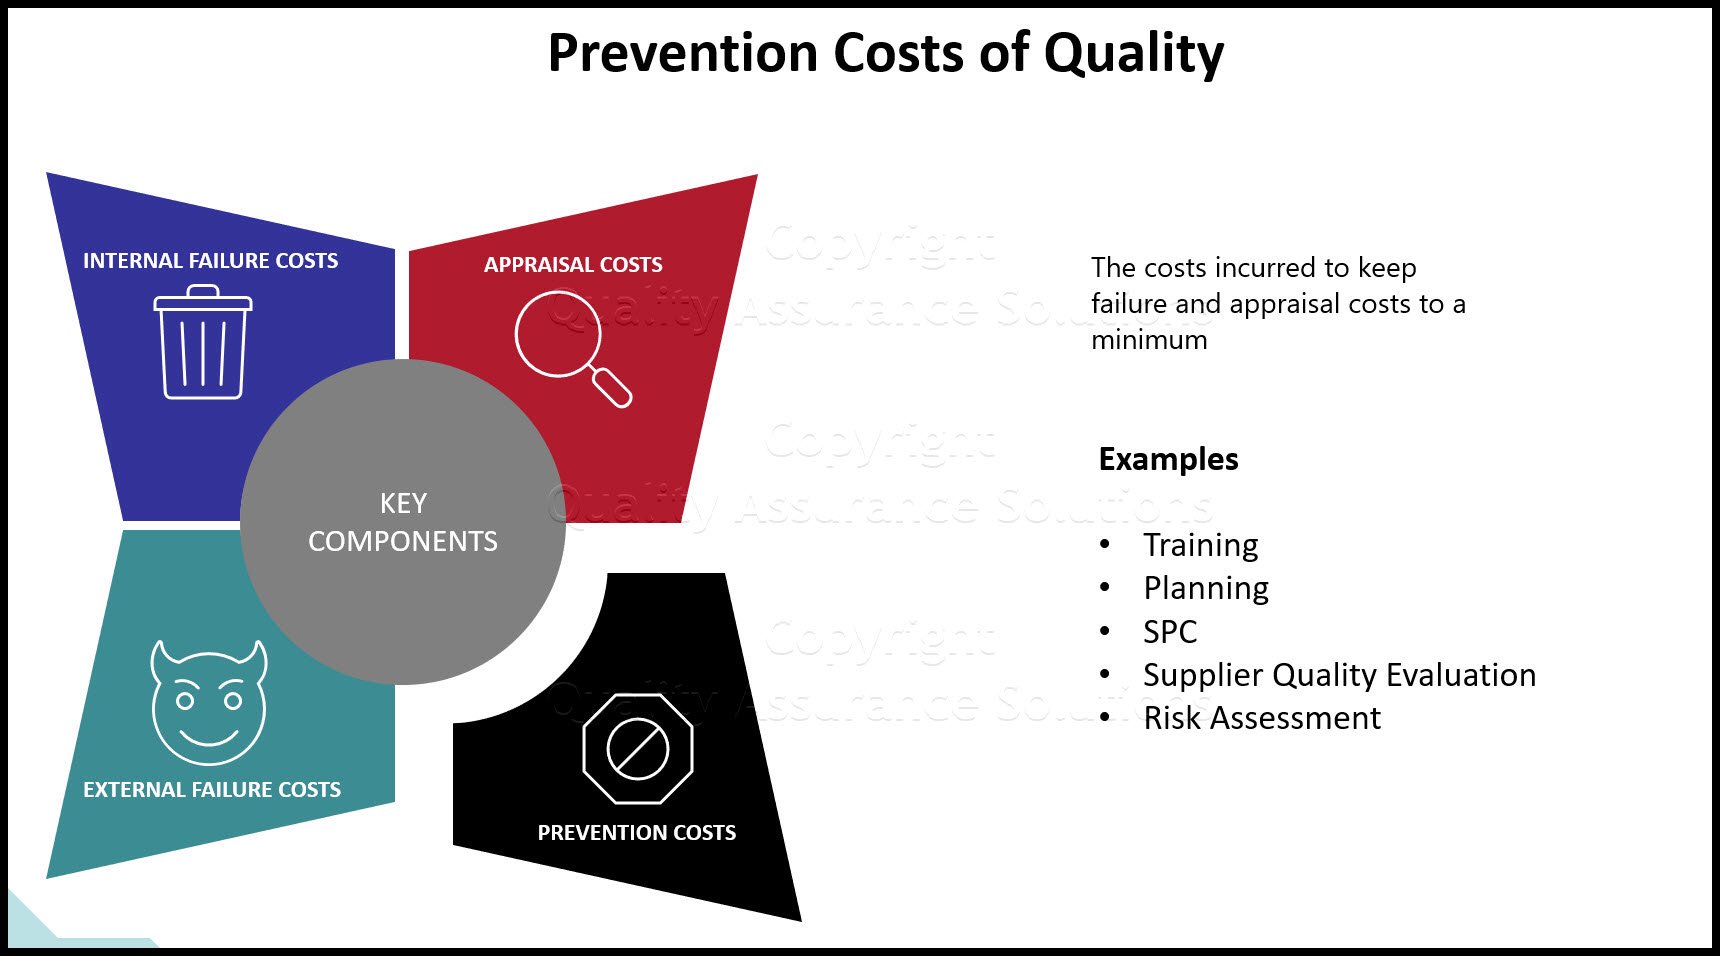 Prevention Costs are a key component of Quality Costs. Placing your company money in this category prevents future defects and excessive costs.